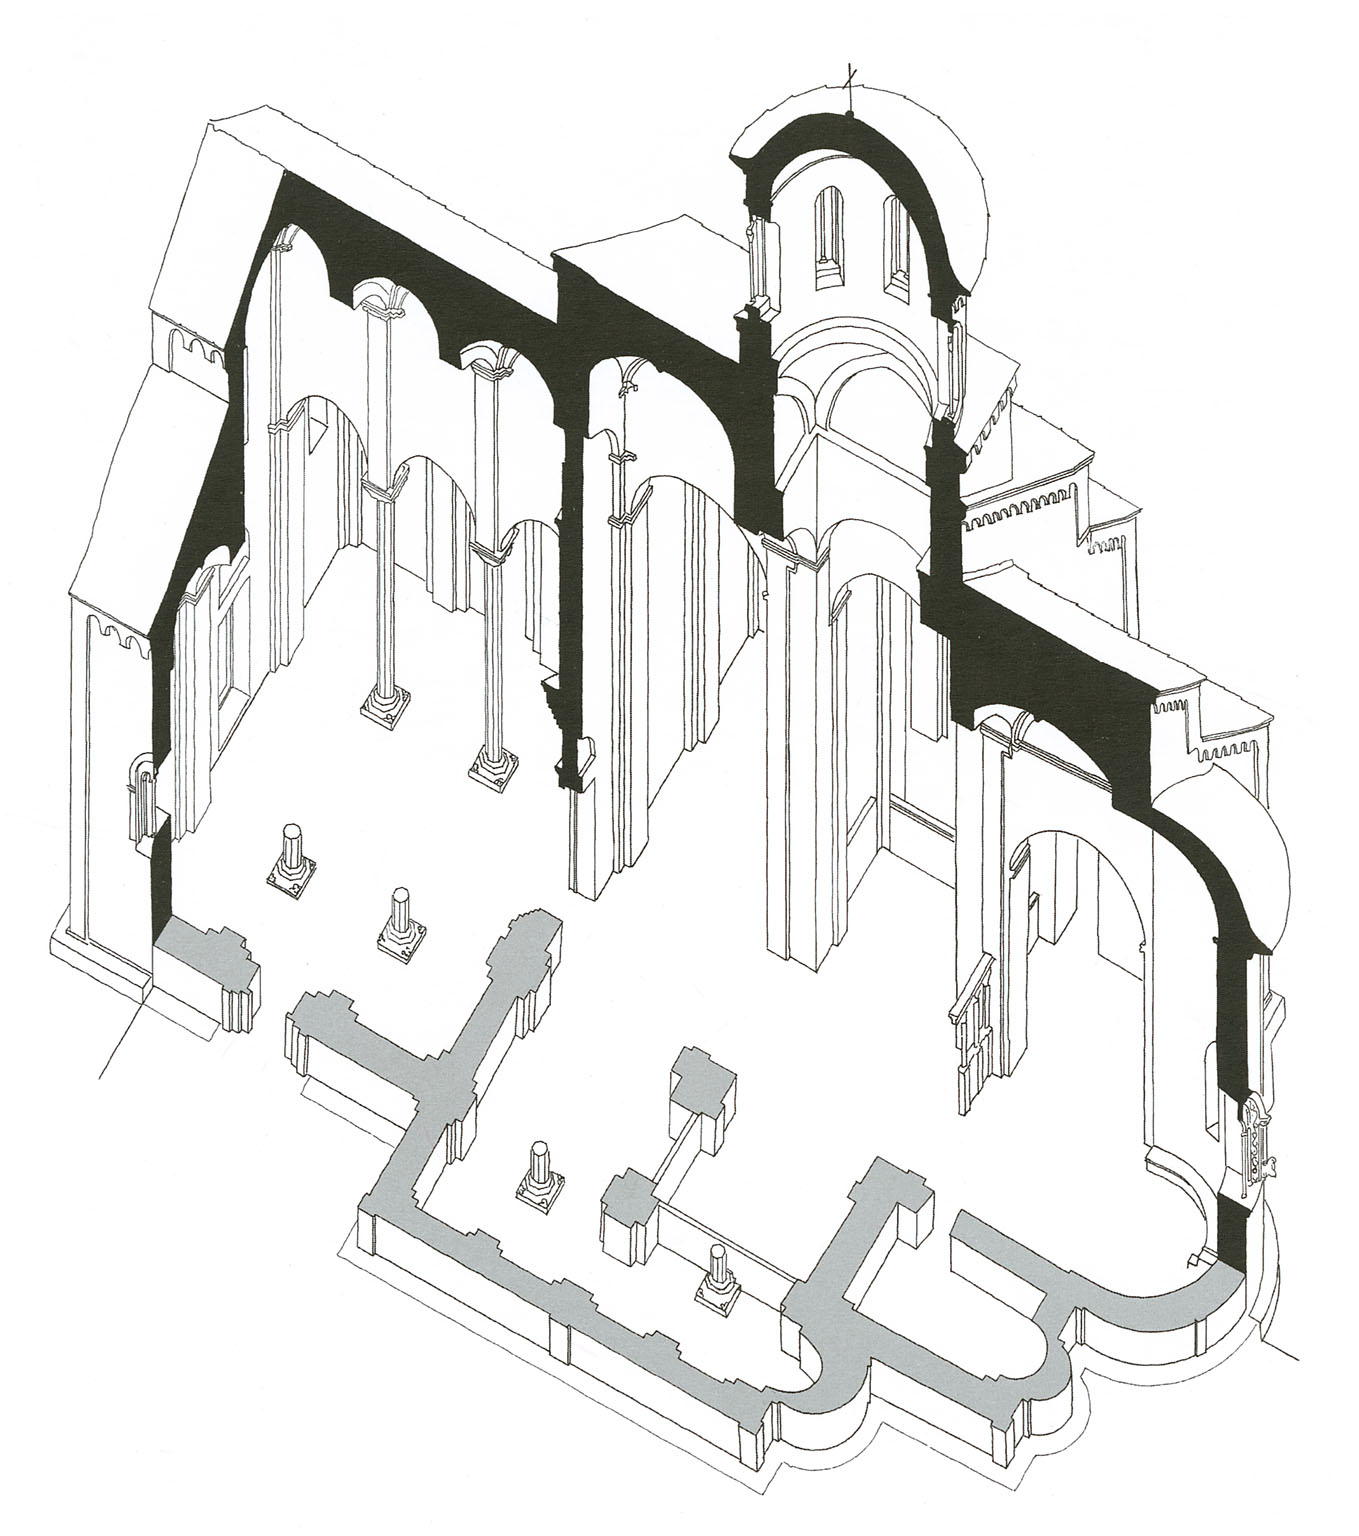 Axonometric view of the Church of Christ Pantokrator, Dečani Monastery (source: S. Ćurčić, Architecture in the Balkans, p. 661, fig. 773)